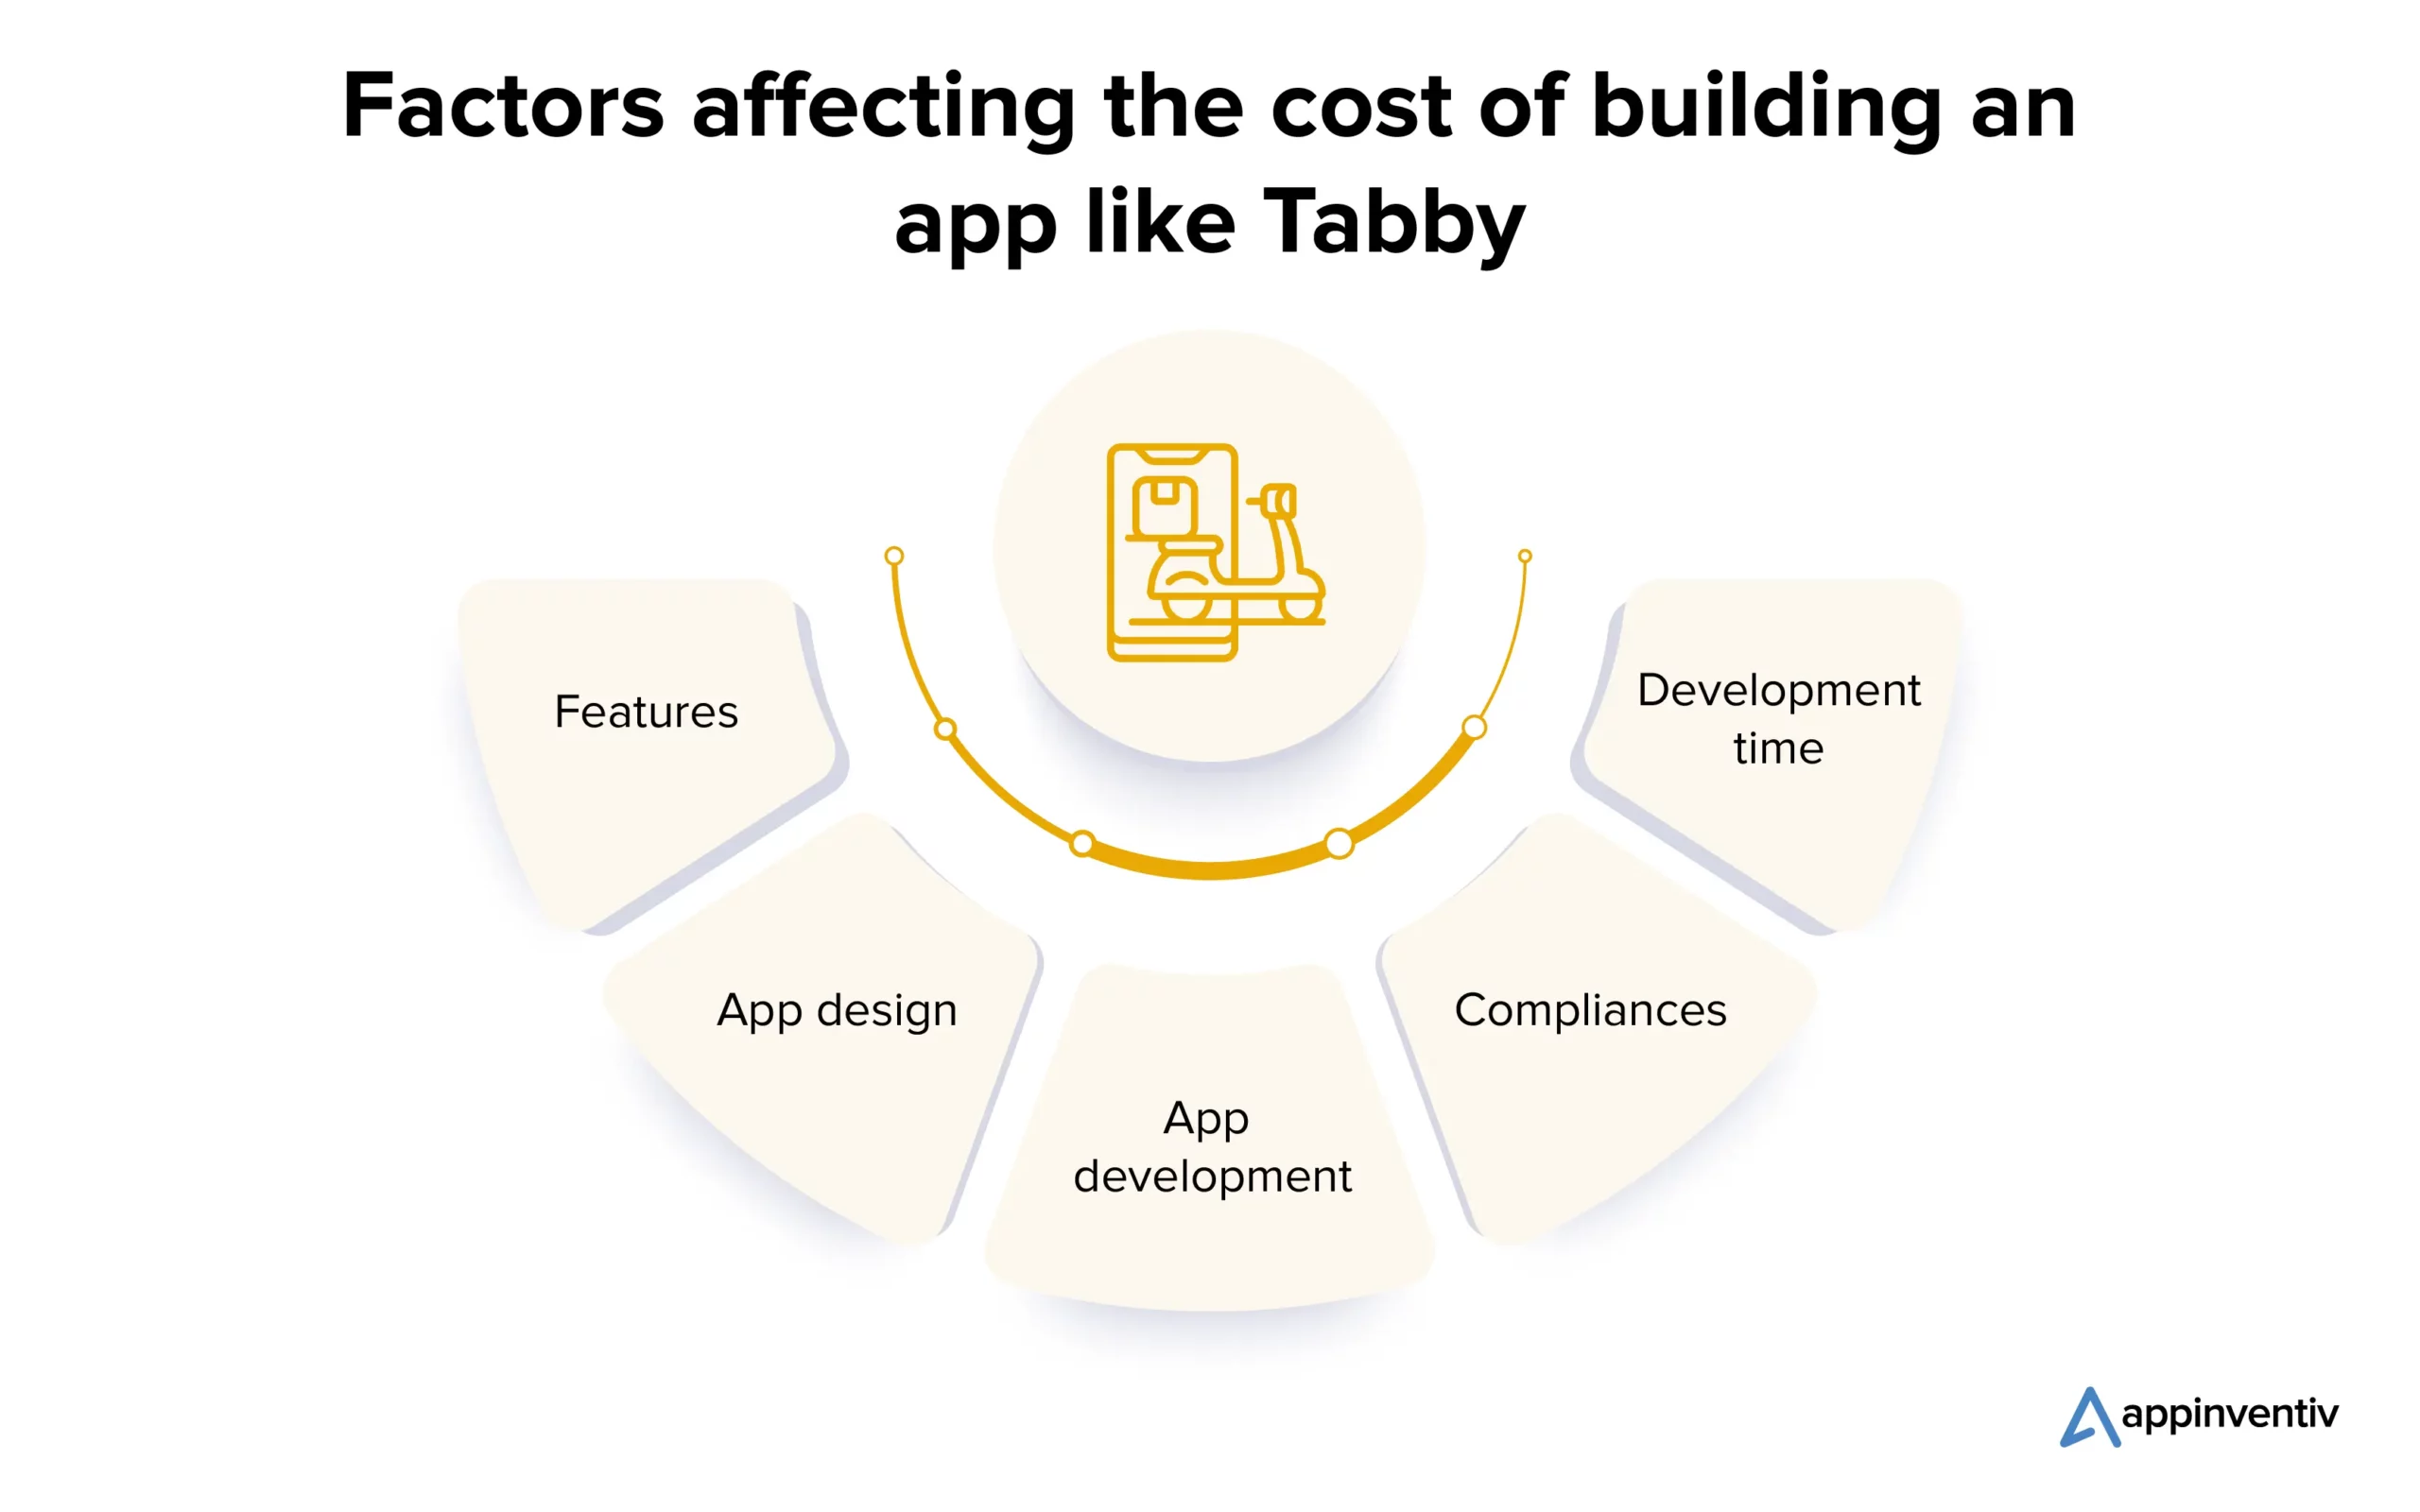 Factors affecting the cost of building an app like Tabby